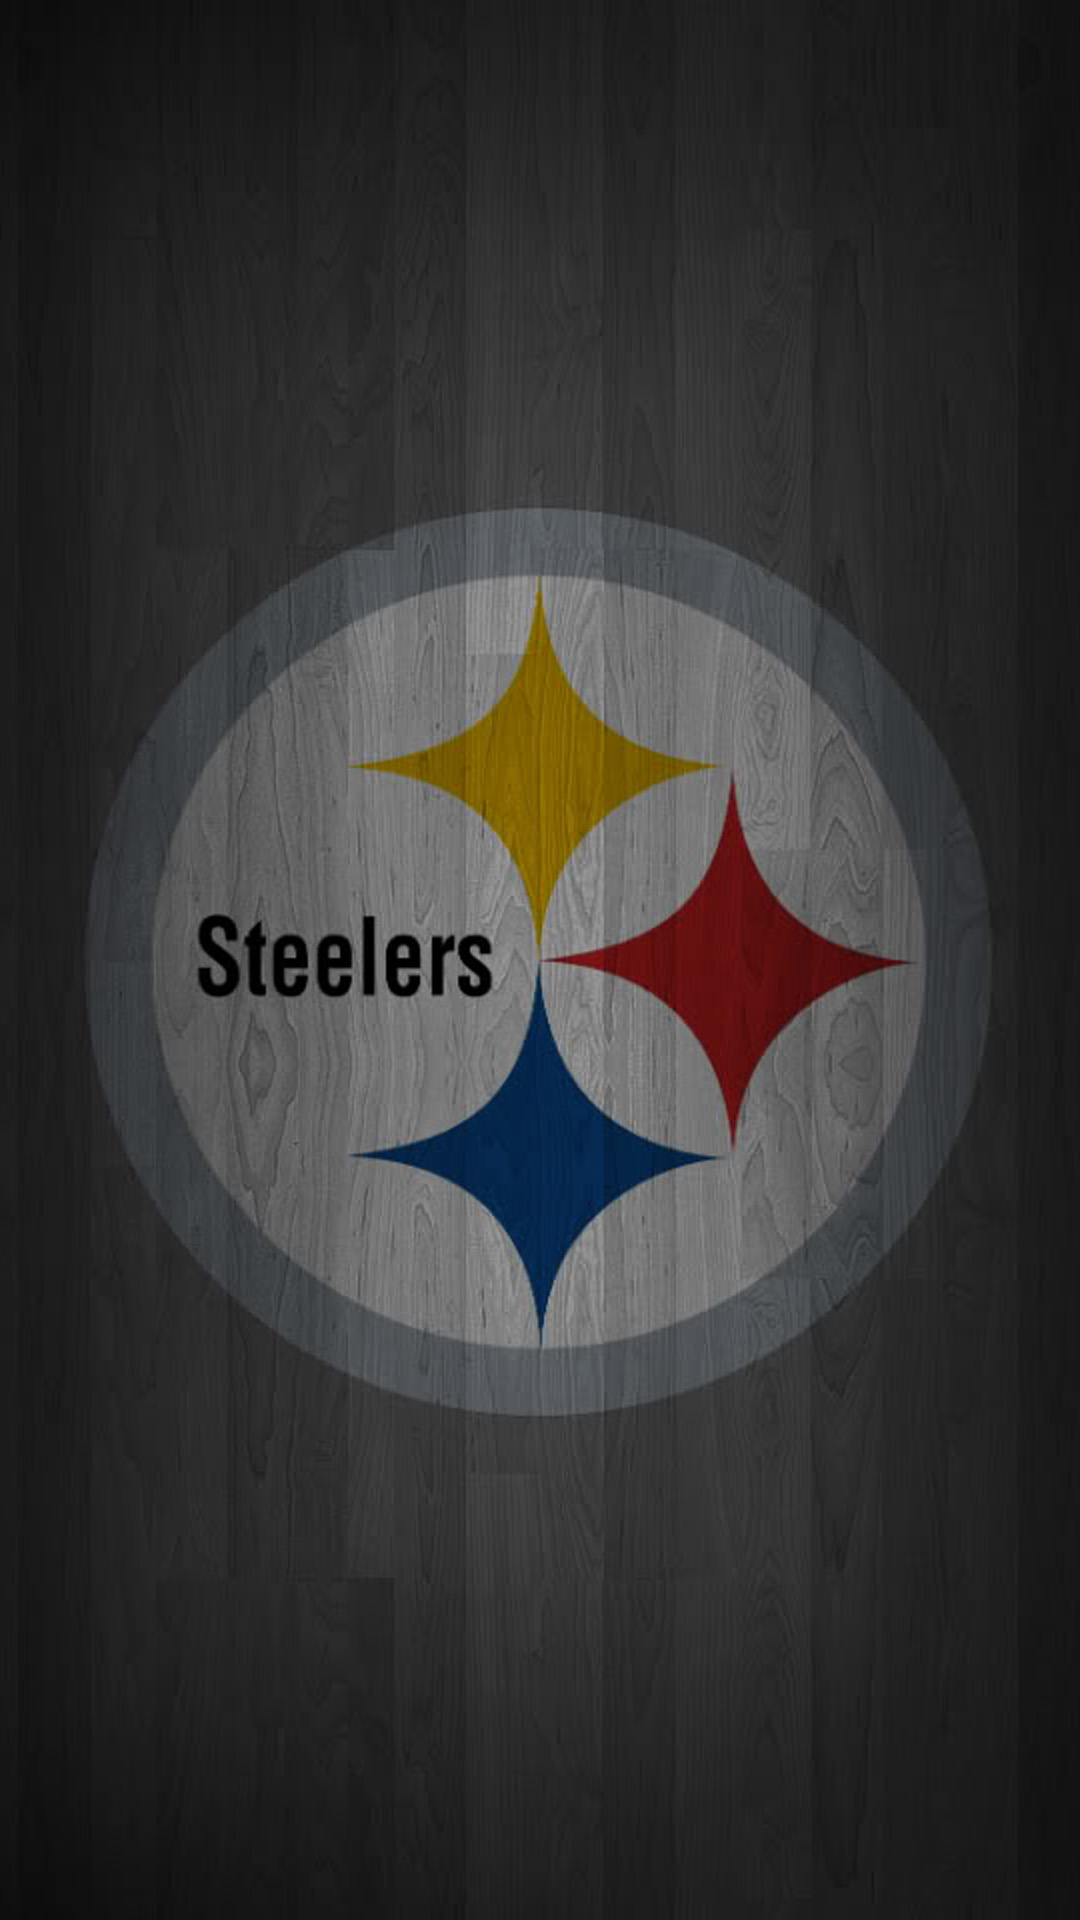 Steelers Wallpapers for Galaxy S5.jpg